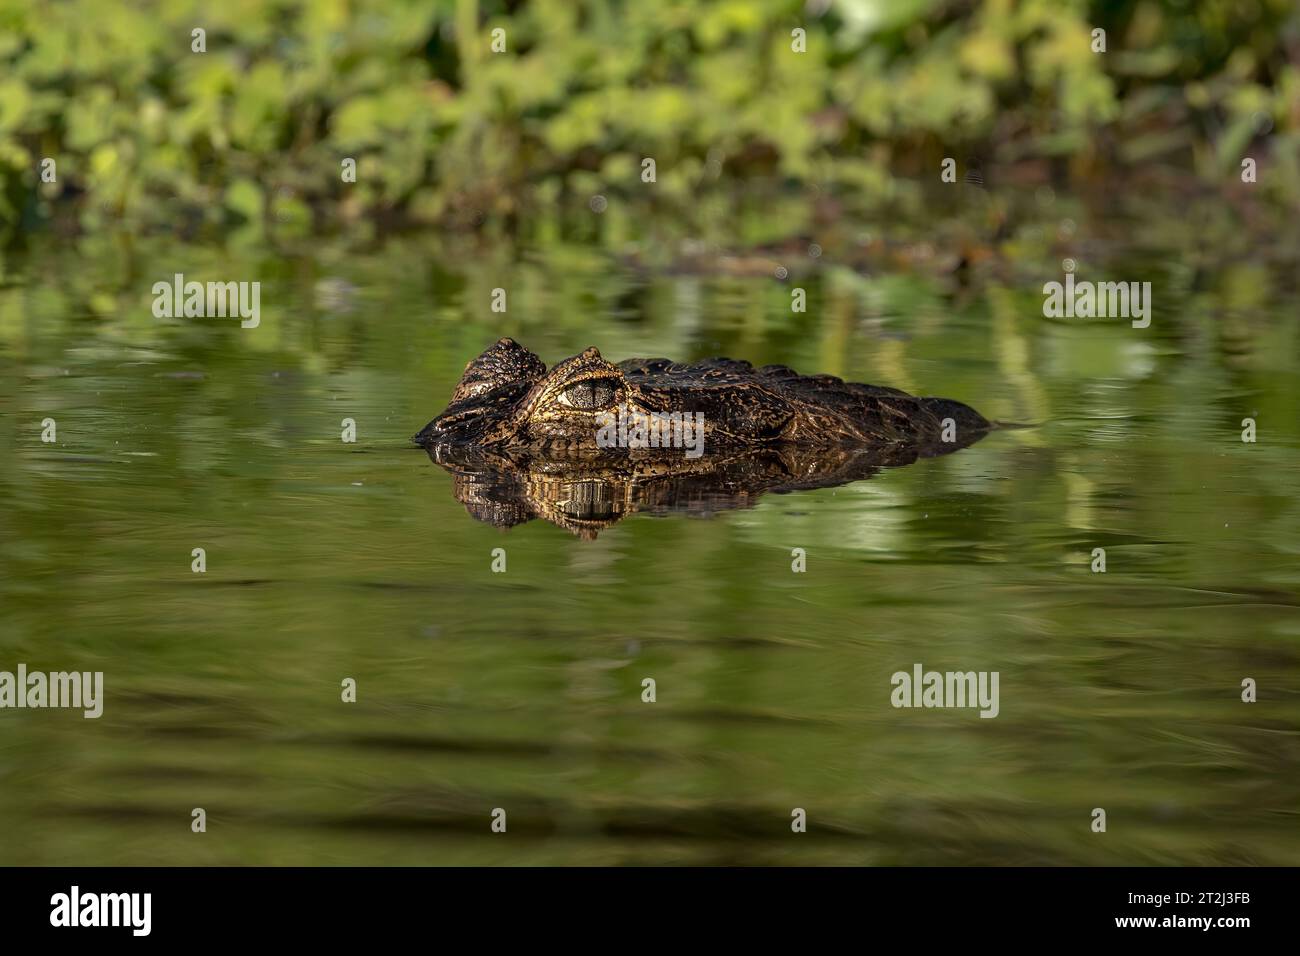 Danger lurks in the still tropical waters of the Brazilian Pantanal, as a watchful caiman (Caiman crocodilus) waits patiently for a meal. Stock Photo